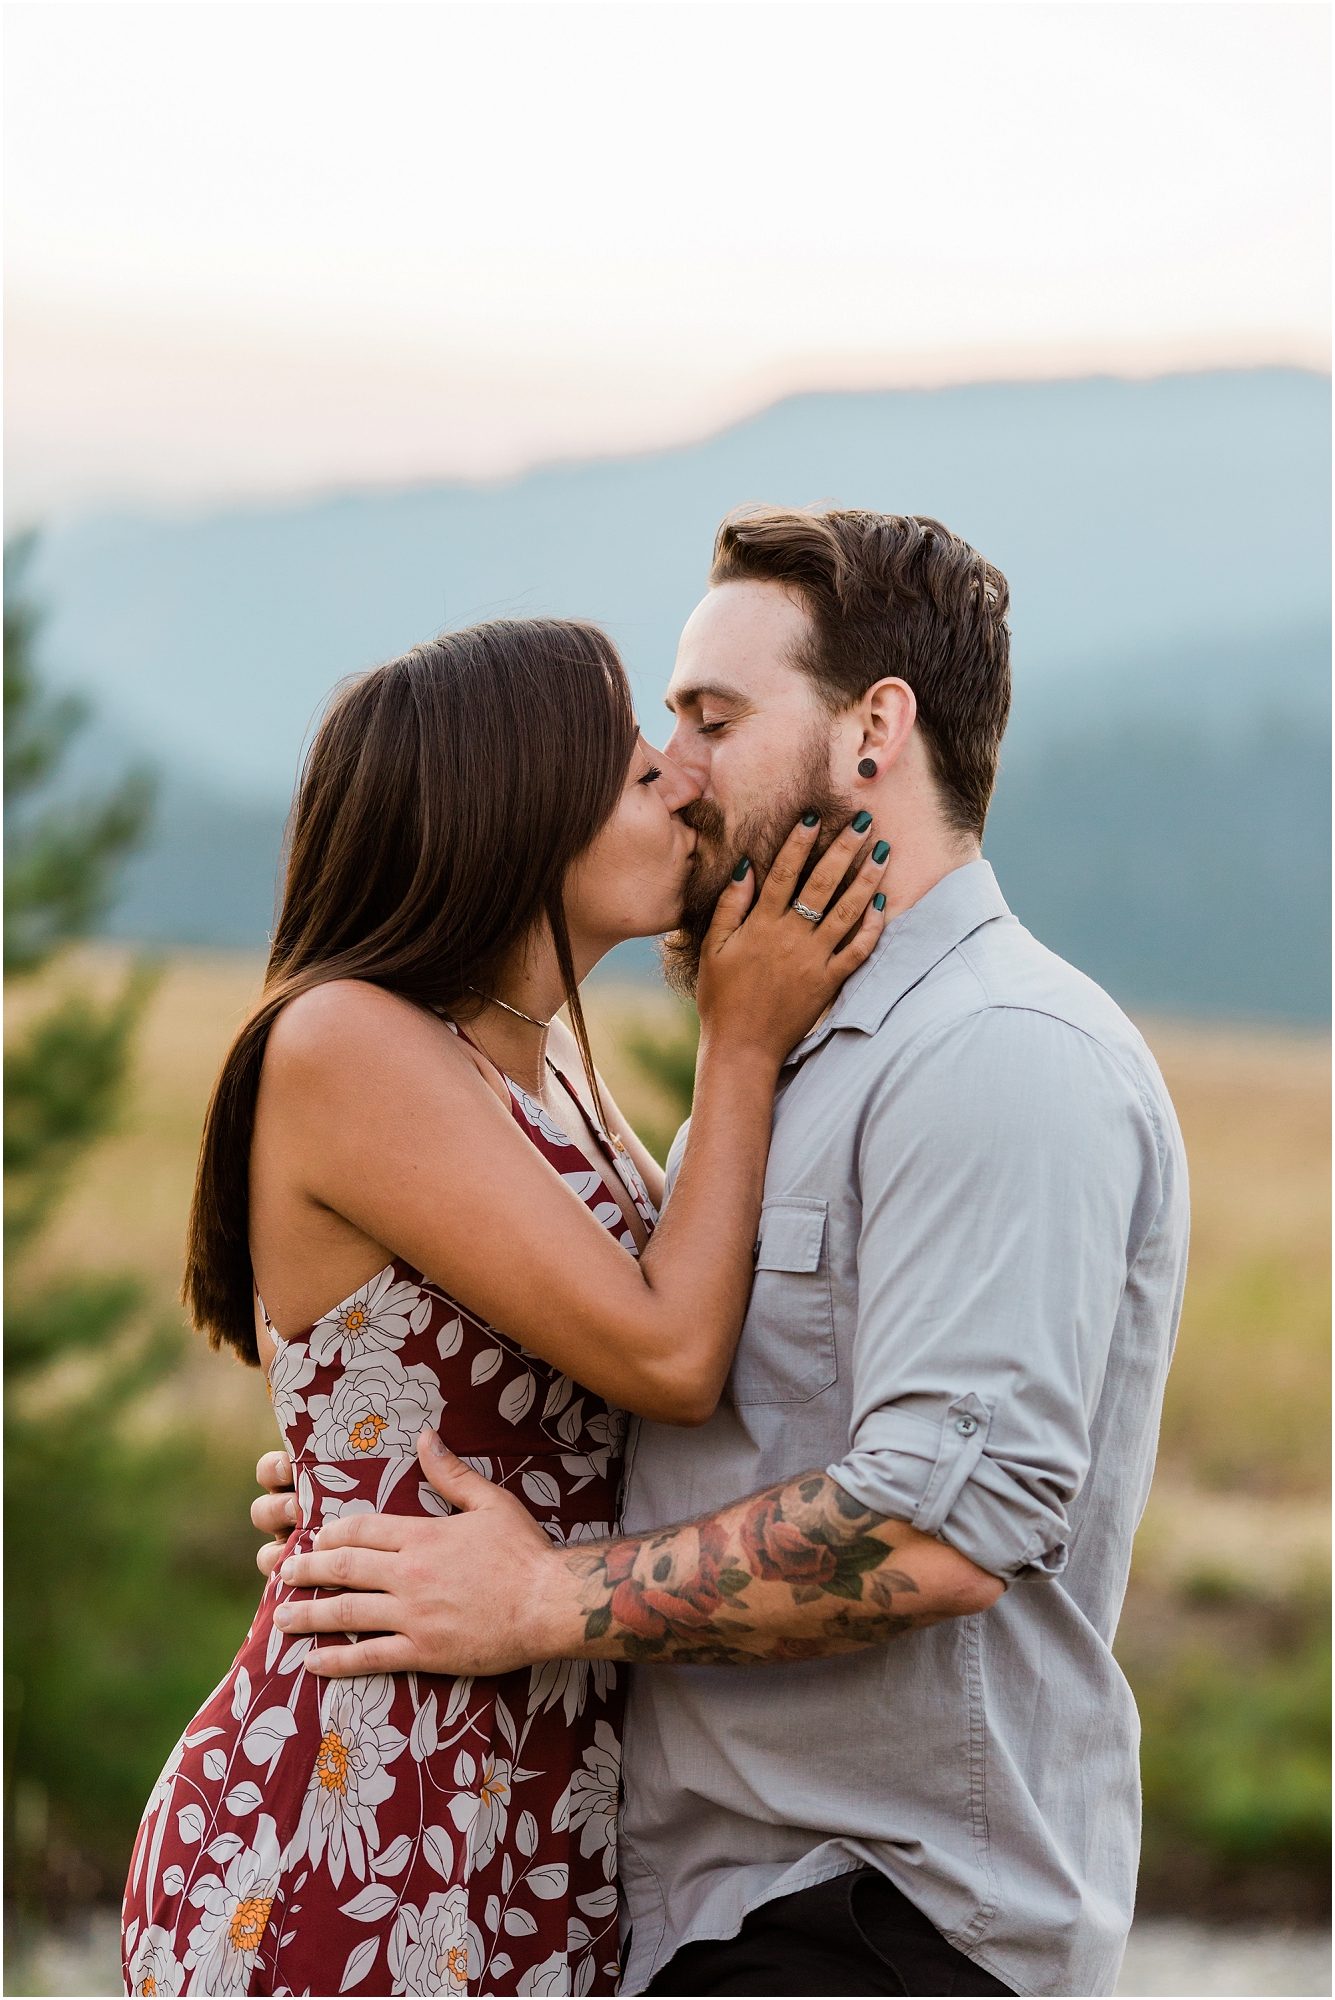 A passionate kiss for this gorgeous engagement photo session by Bend Oregon wedding photographer Erica Swantek Photography.